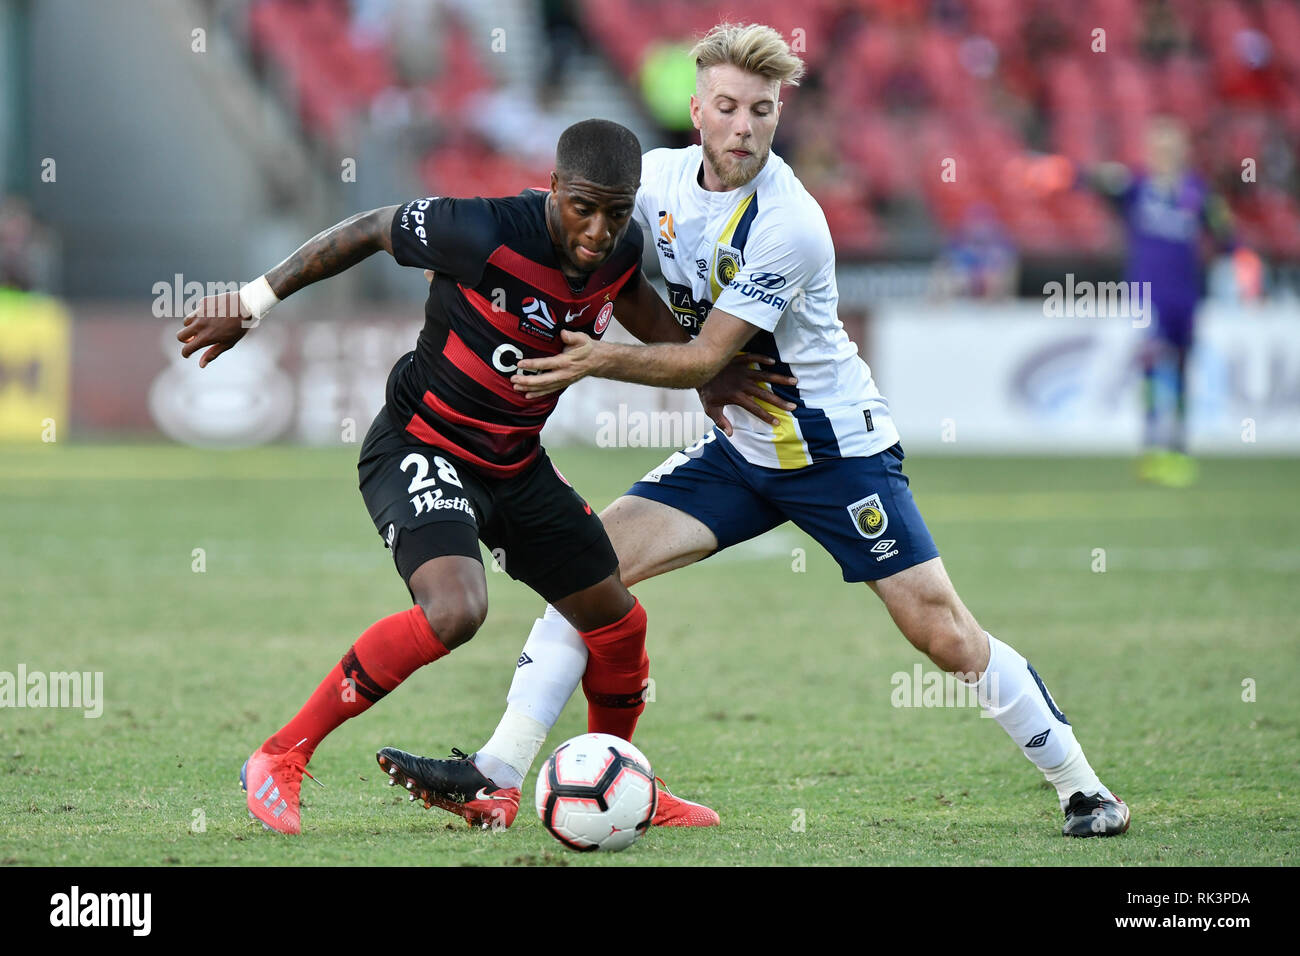 Spotless Stadium, Sydney, Australia. 9th Feb, 2019. A League football, Western Sydney Wanderers versus Central Coast Mariners; Andrew Hoole of the Central Coast Mariners closely marks Roly Bonevacia of the Western Sydney Wanderers Credit: Action Plus Sports/Alamy Live News Stock Photo